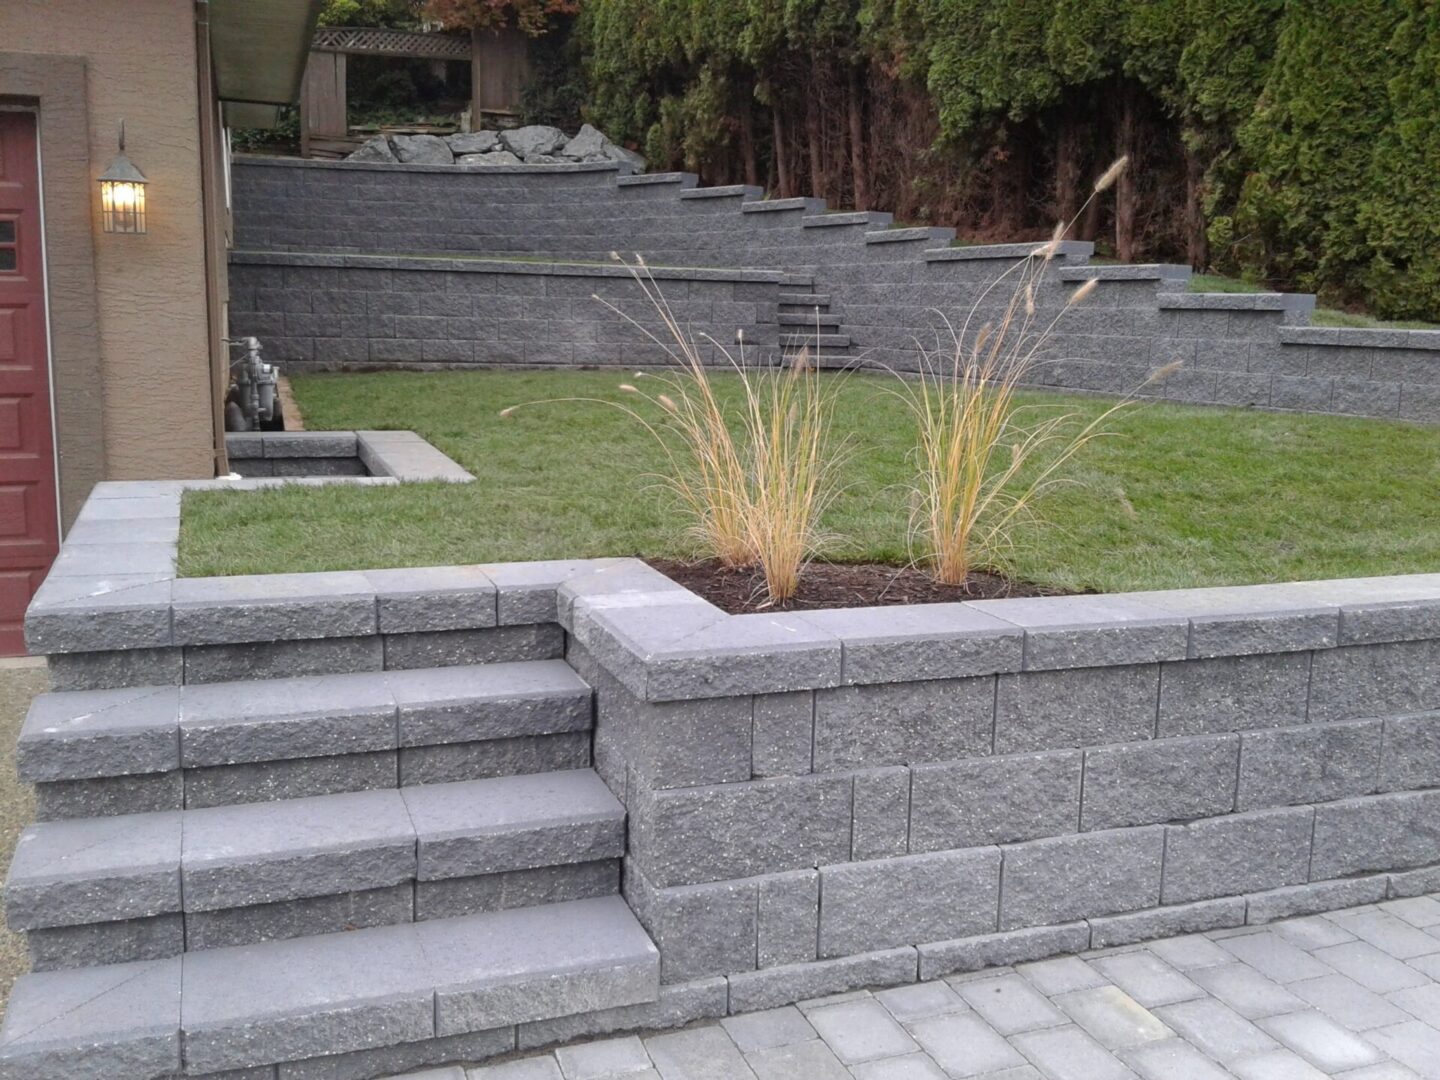 A landscaped backyard with a stone staircase, neatly trimmed grass, ornamental grasses, and layered stone walls.